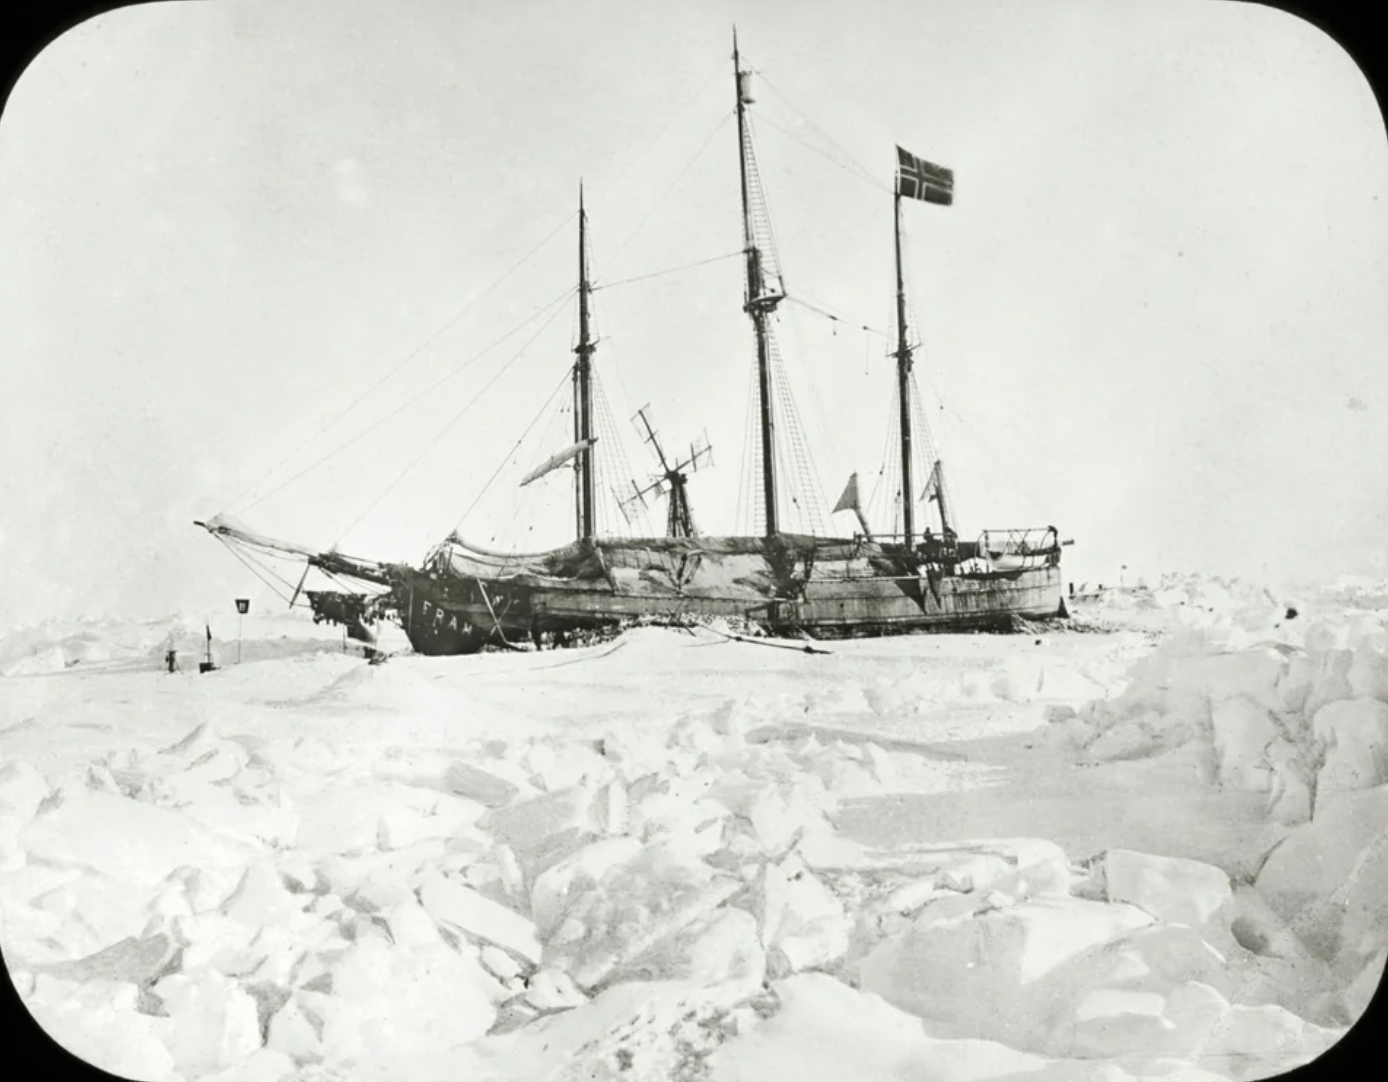 The 'Fram' in the ice. Nansen's Fram expedition of 1893-1896 was an attempt by the Norwegian explorer Fridtjof Nansen to reach the geographical North Pole, Arctic 1896.